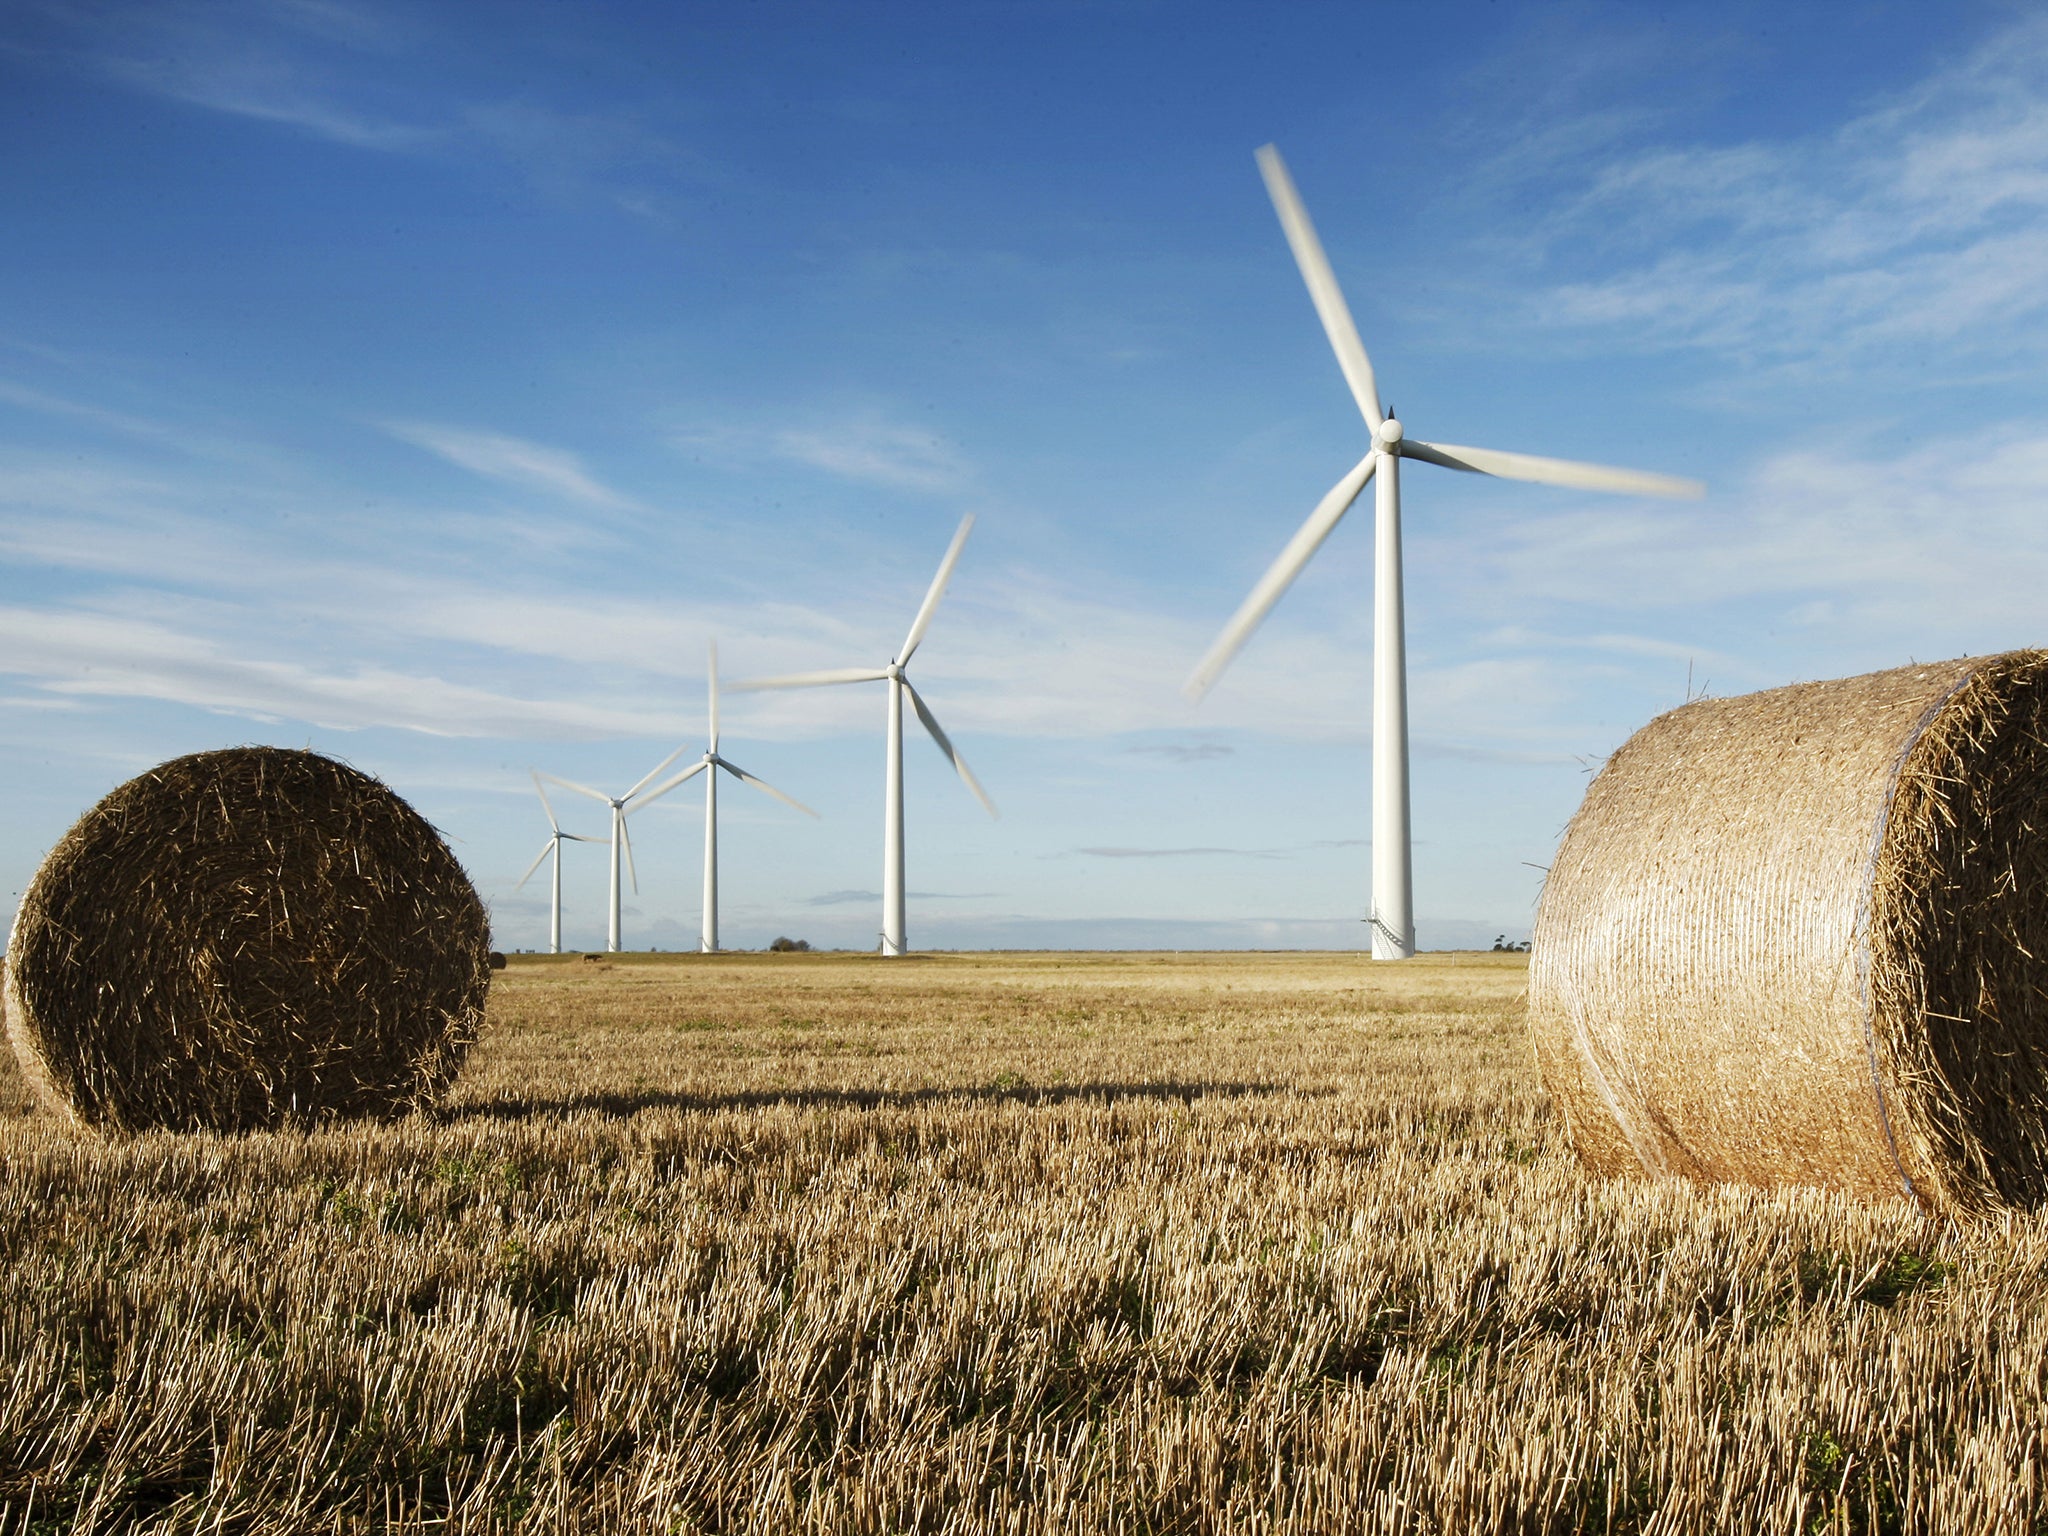 Denmark is promising 50 per cent of its electricity output will be powered by wind by 2020